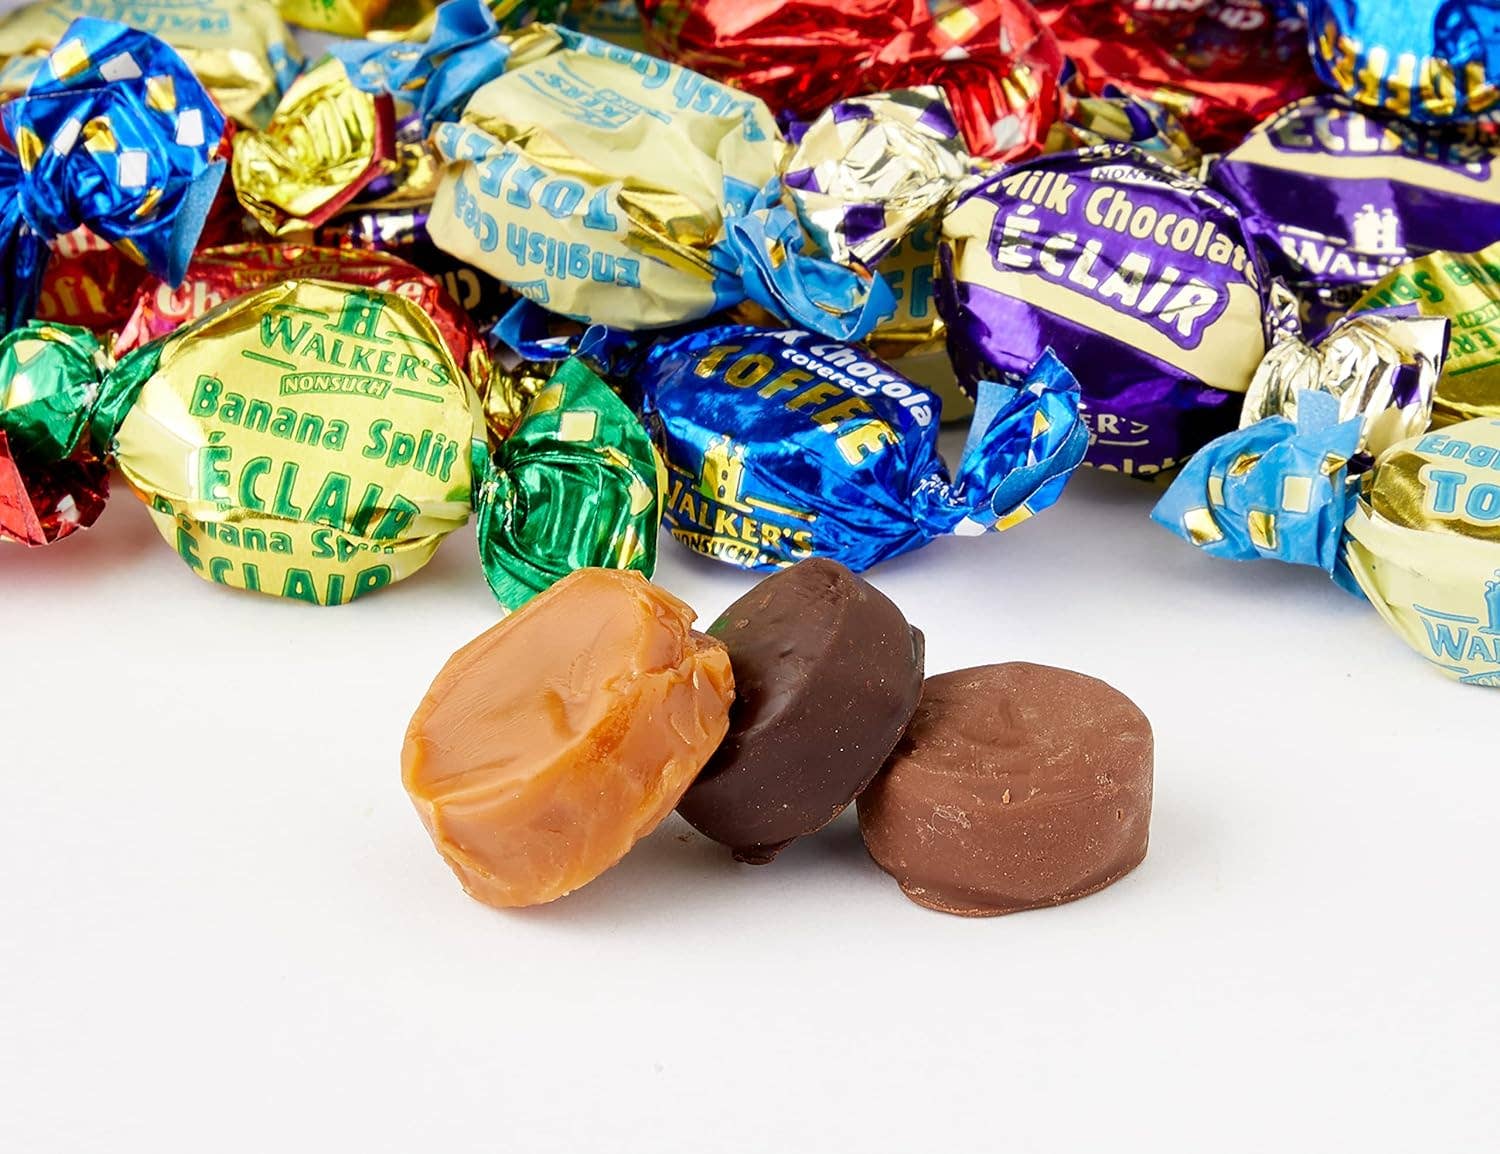 WALKERS English Toffees and Chocolate 1.25kg ($22.45/Unit)